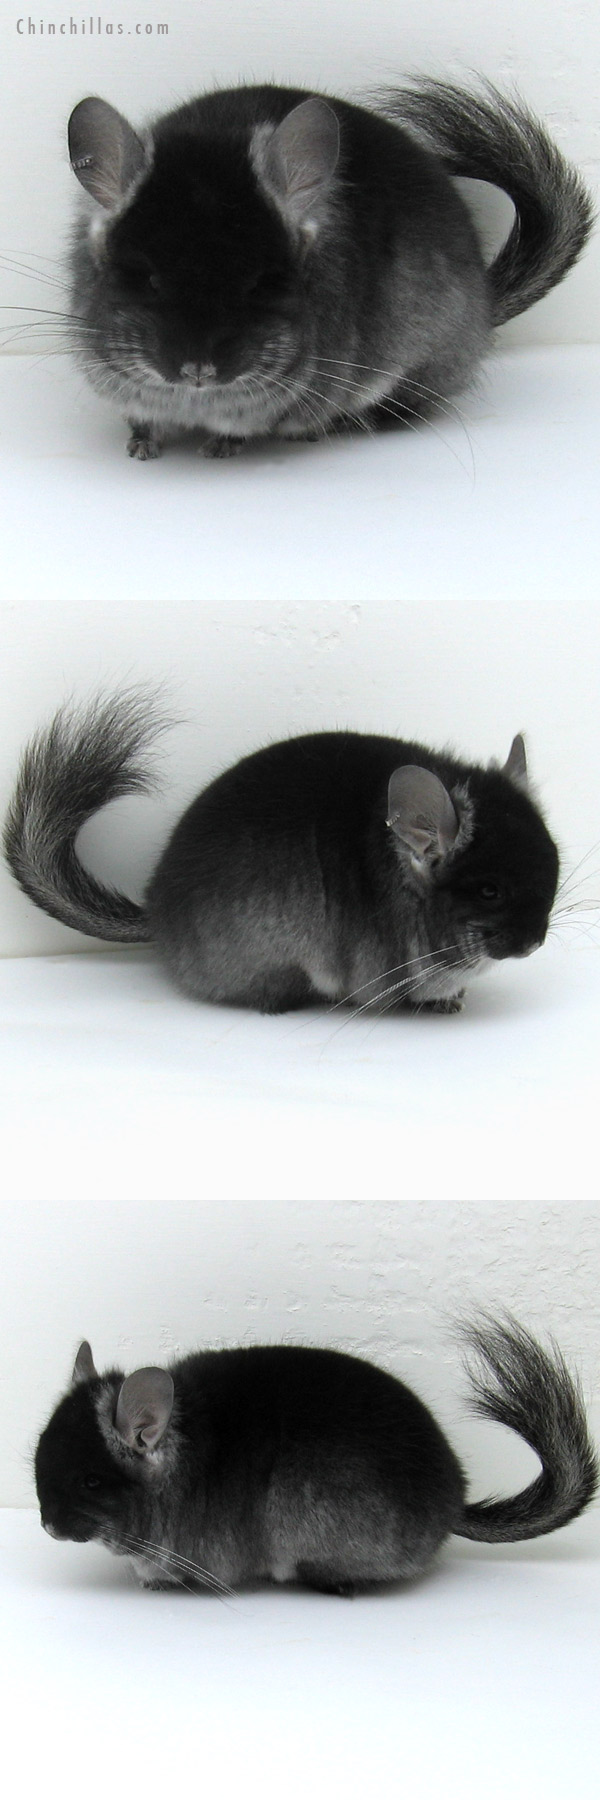 Chinchilla or related item offered for sale or export on Chinchillas.com - 12082 Exceptional Black Velvet Royal Persian Angora Male Chinchilla